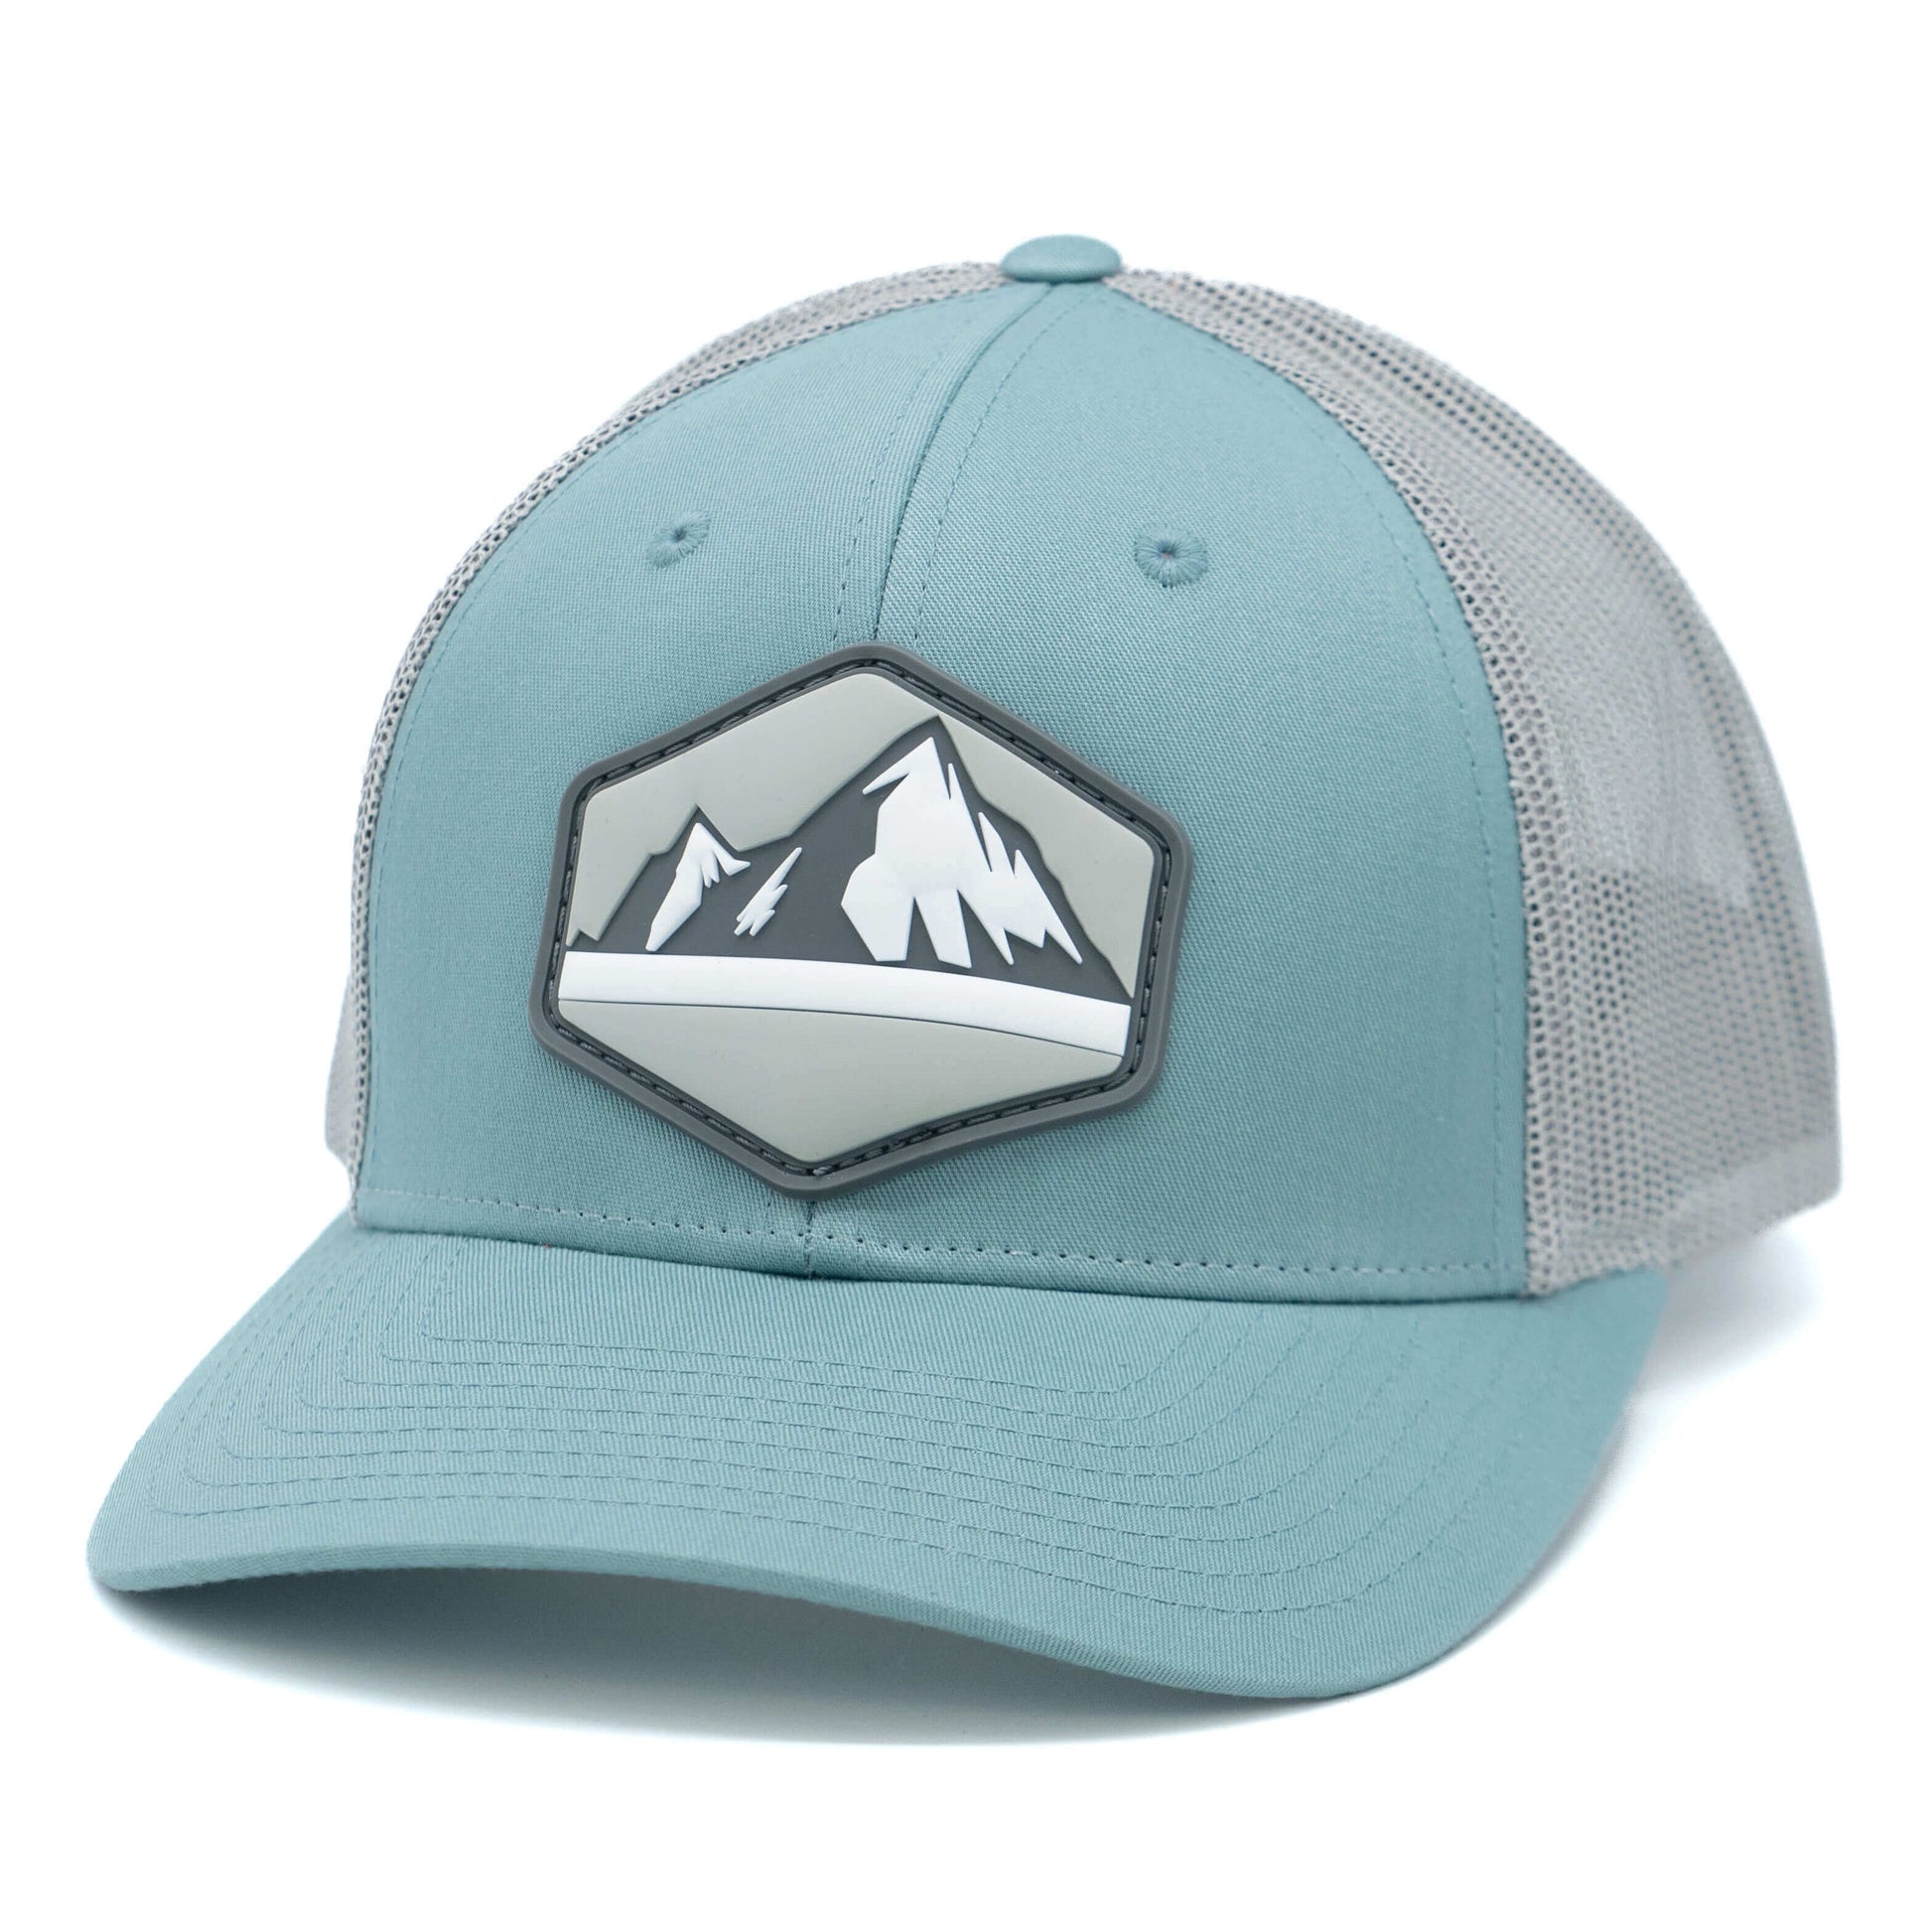 HGP Mountain View PVC Patch Teal/Grey Snapback Trucker Hat